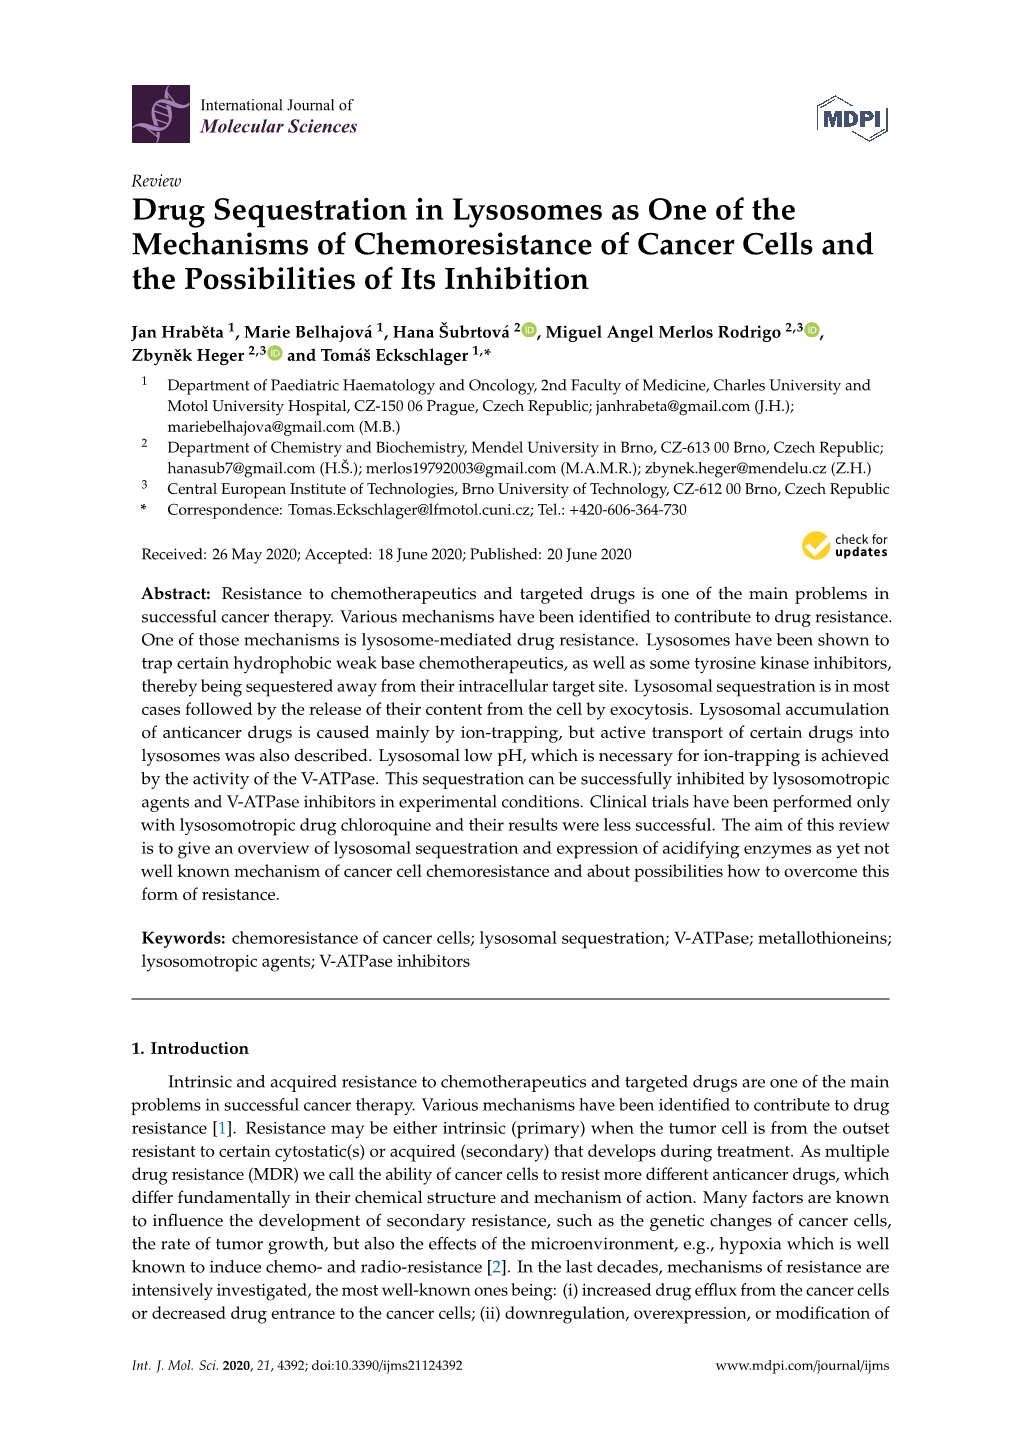 Drug Sequestration in Lysosomes As One of the Mechanisms of Chemoresistance of Cancer Cells and the Possibilities of Its Inhibition